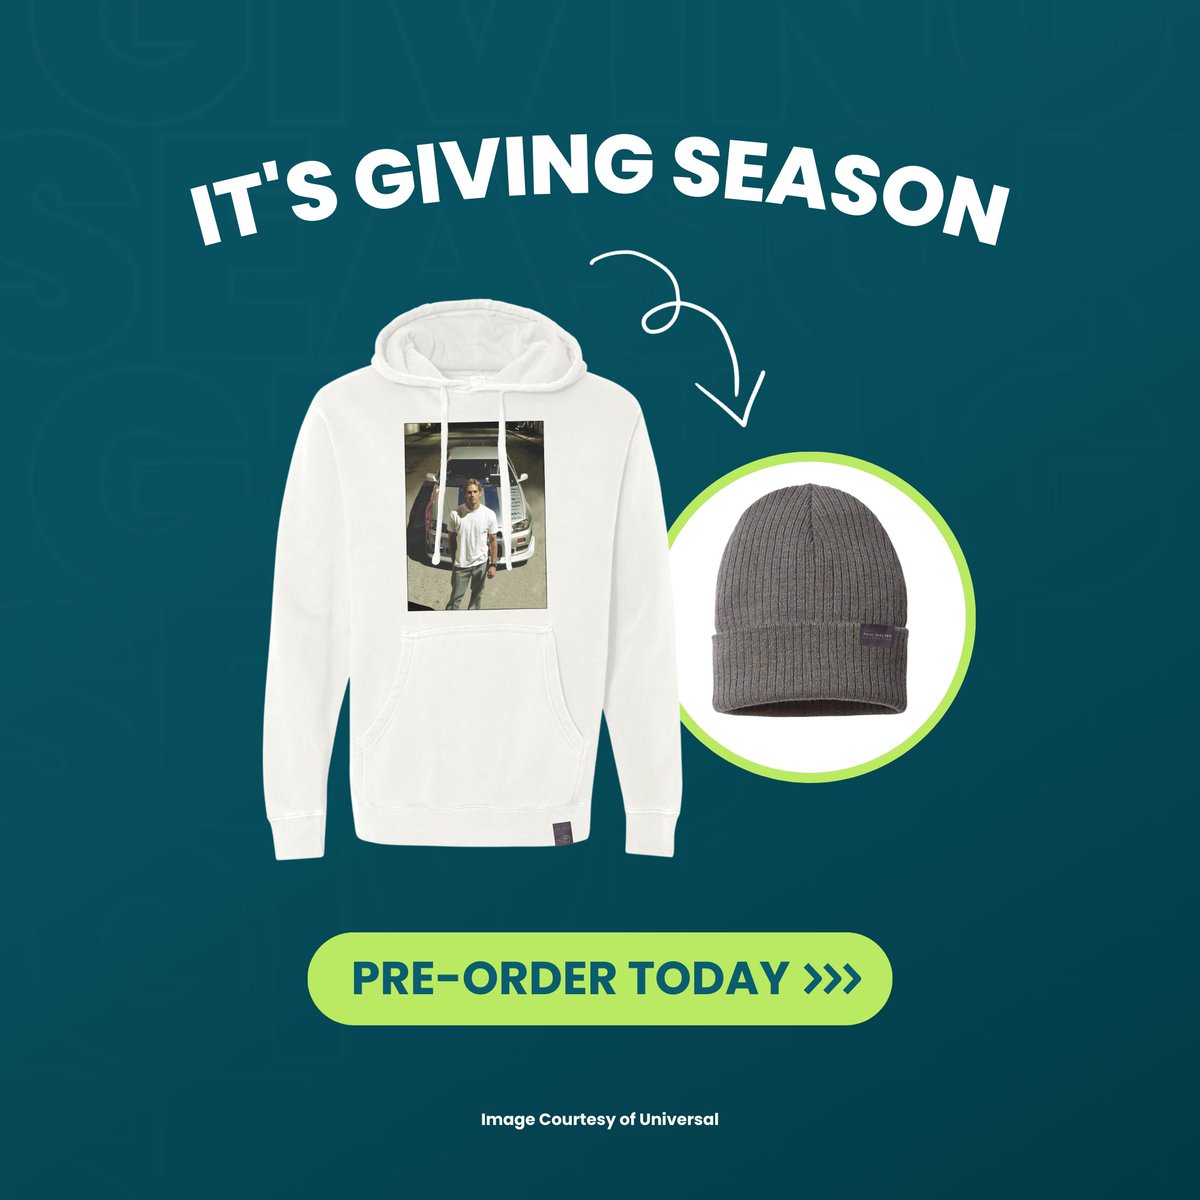 Purchase your exclusive merch today and receive 25% off of any second item. 100% of profits fuel The Paul Walker Foundation's mission to DO GOOD.® 💙 Link in bio. Image courtesy of Universal. PRE-ORDER ONLY. #givingseason #DOGOOD.® #paulwalkerfoundation